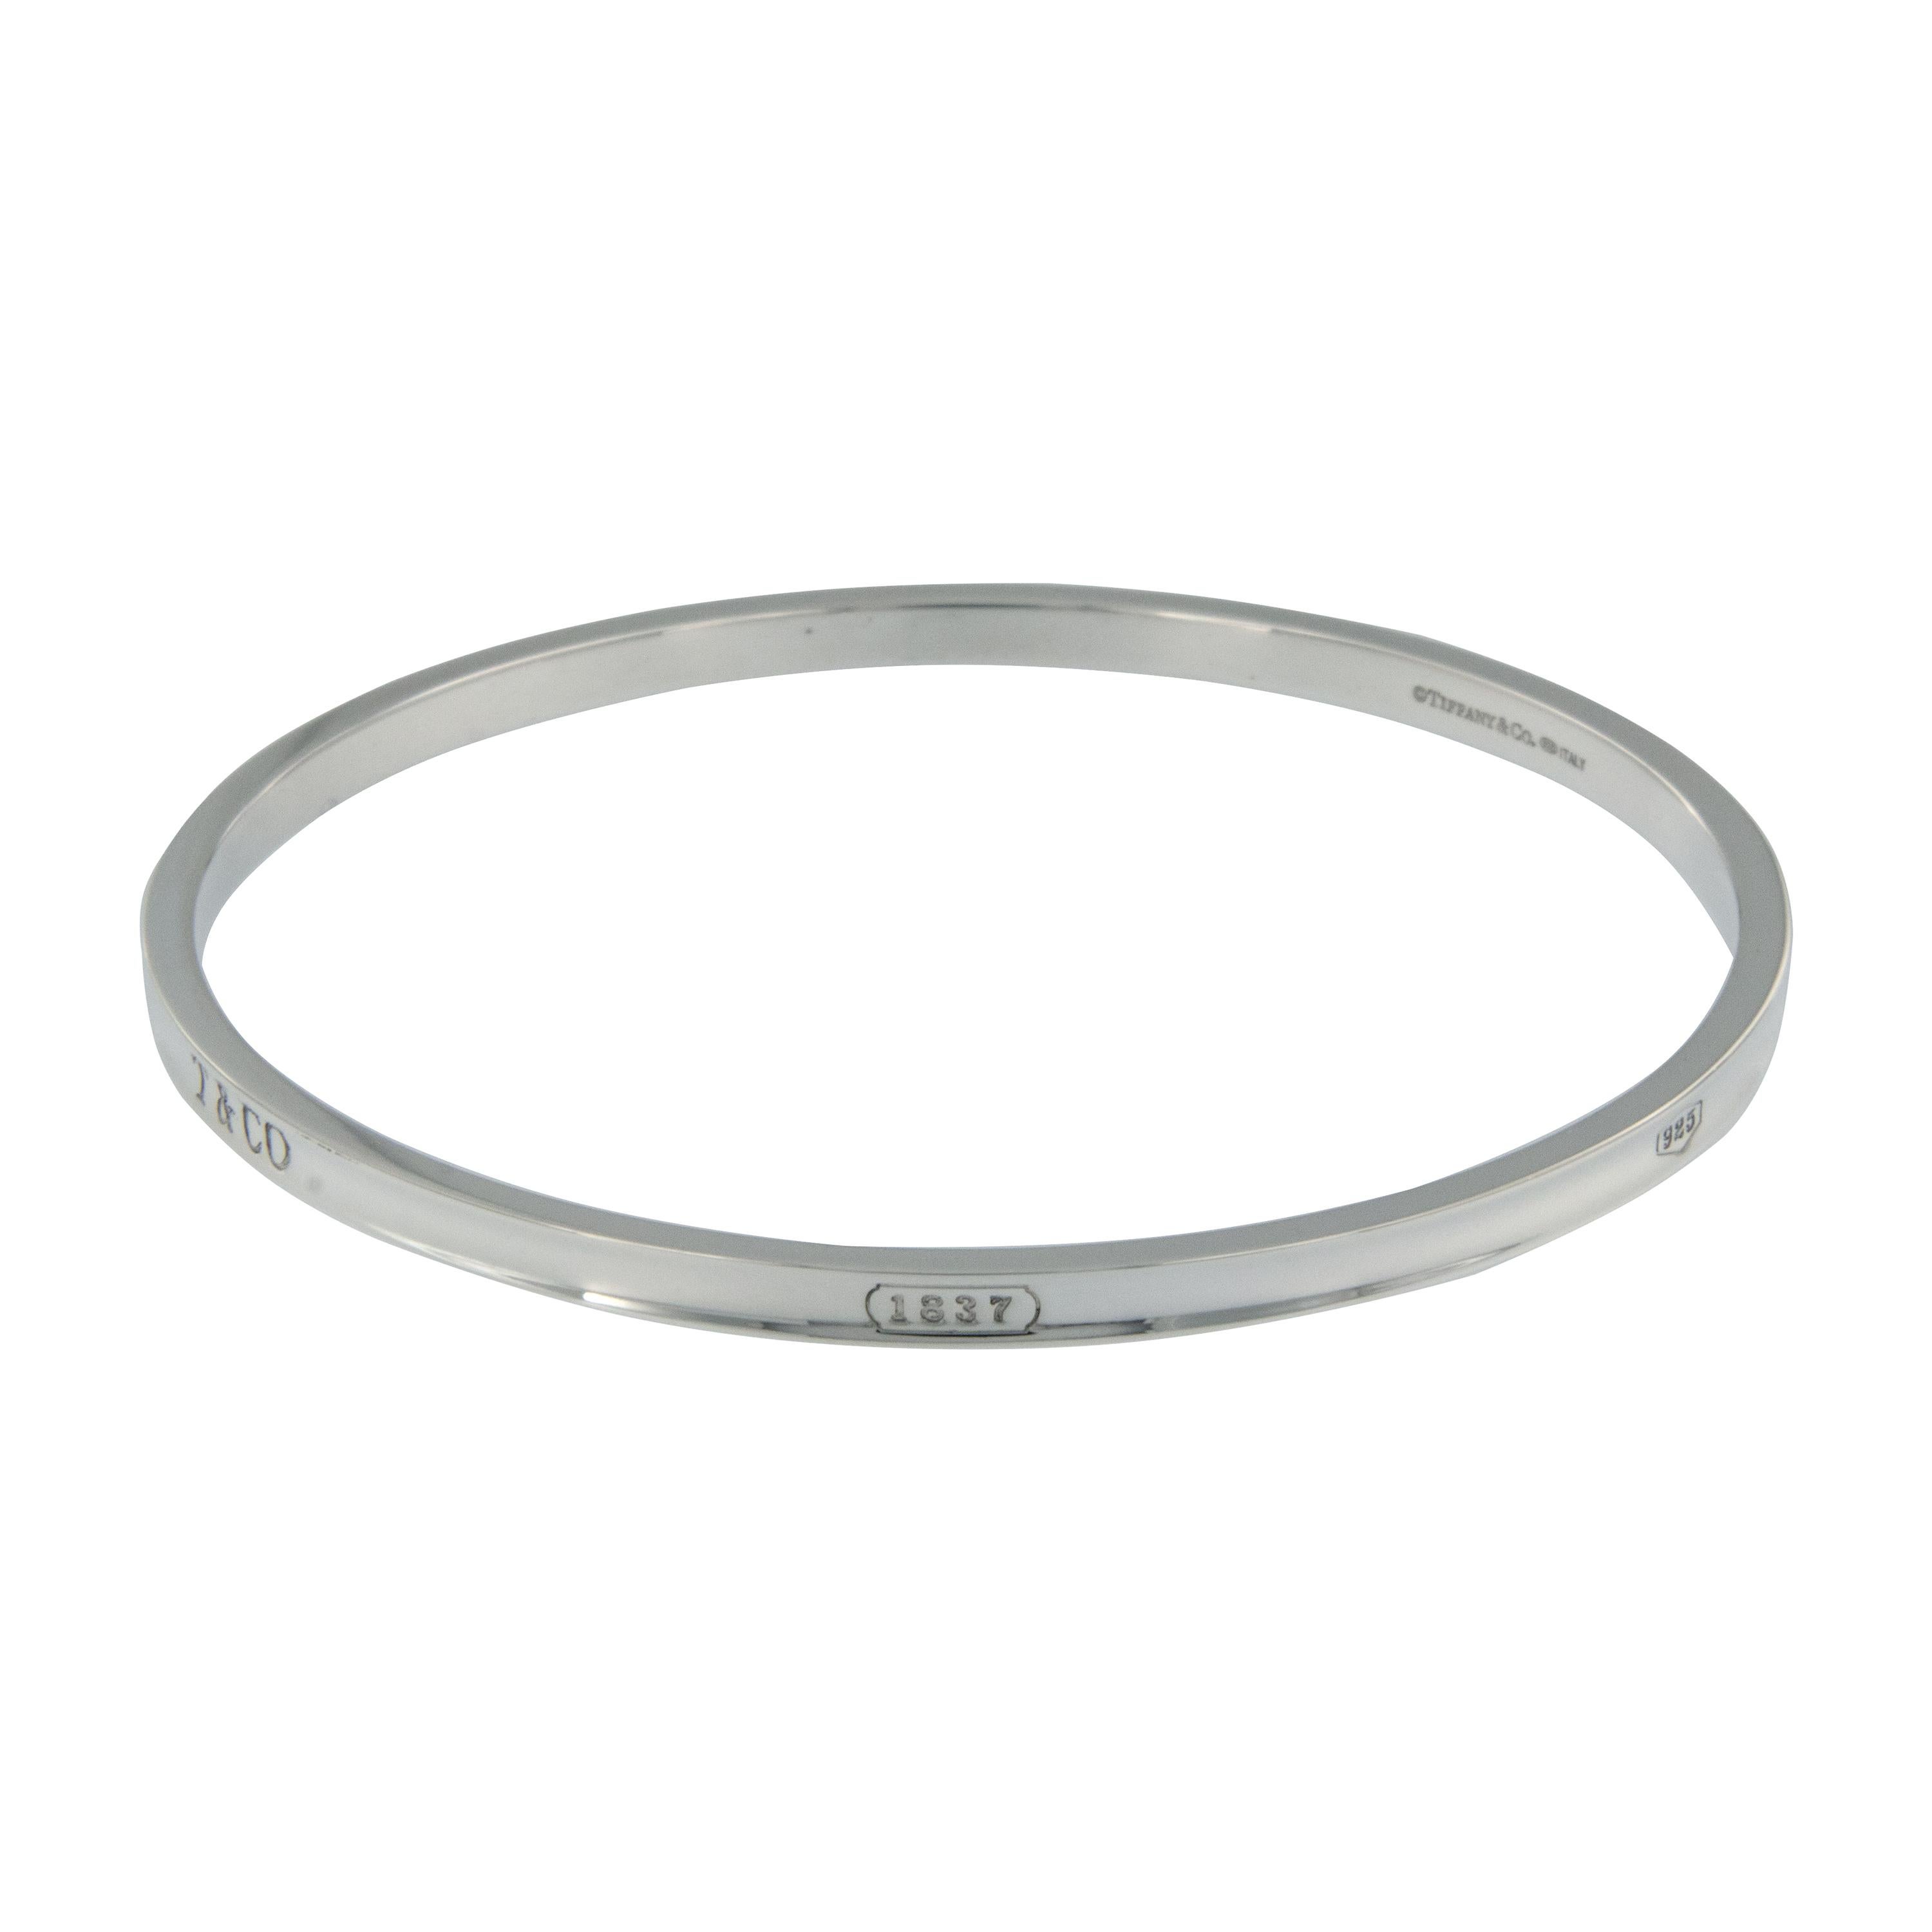 Inscribed with the year Tiffany & Co. was founded, the Tiffany 1837™ collection celebrates authentic craftsmanship and their proud legacy as an influential design house. This timeless bangle is perfect for every day wear as it's simplistic,